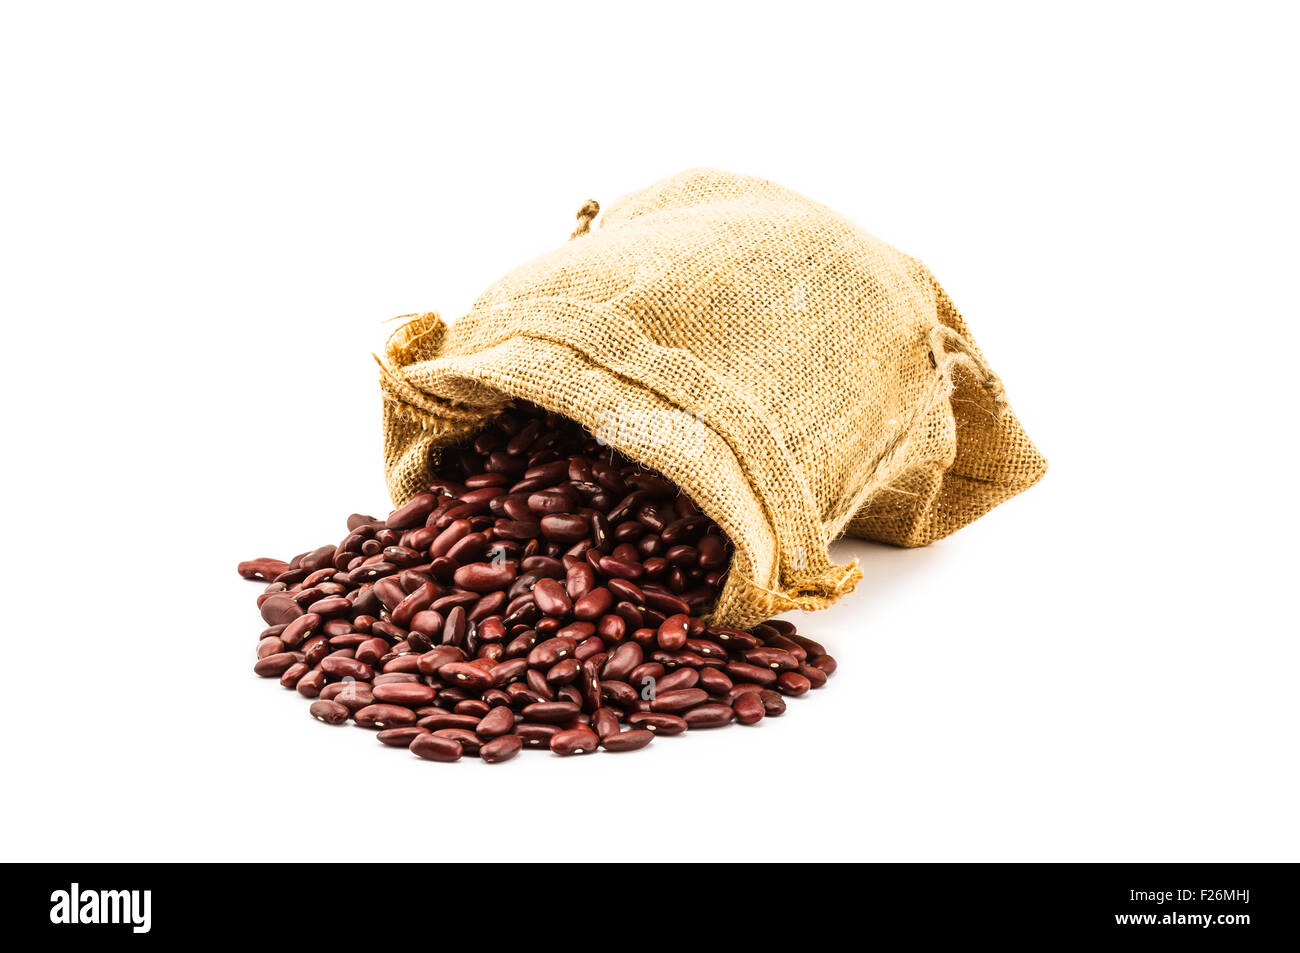 Red kidney bean in a ramie sac on white background Stock Photo